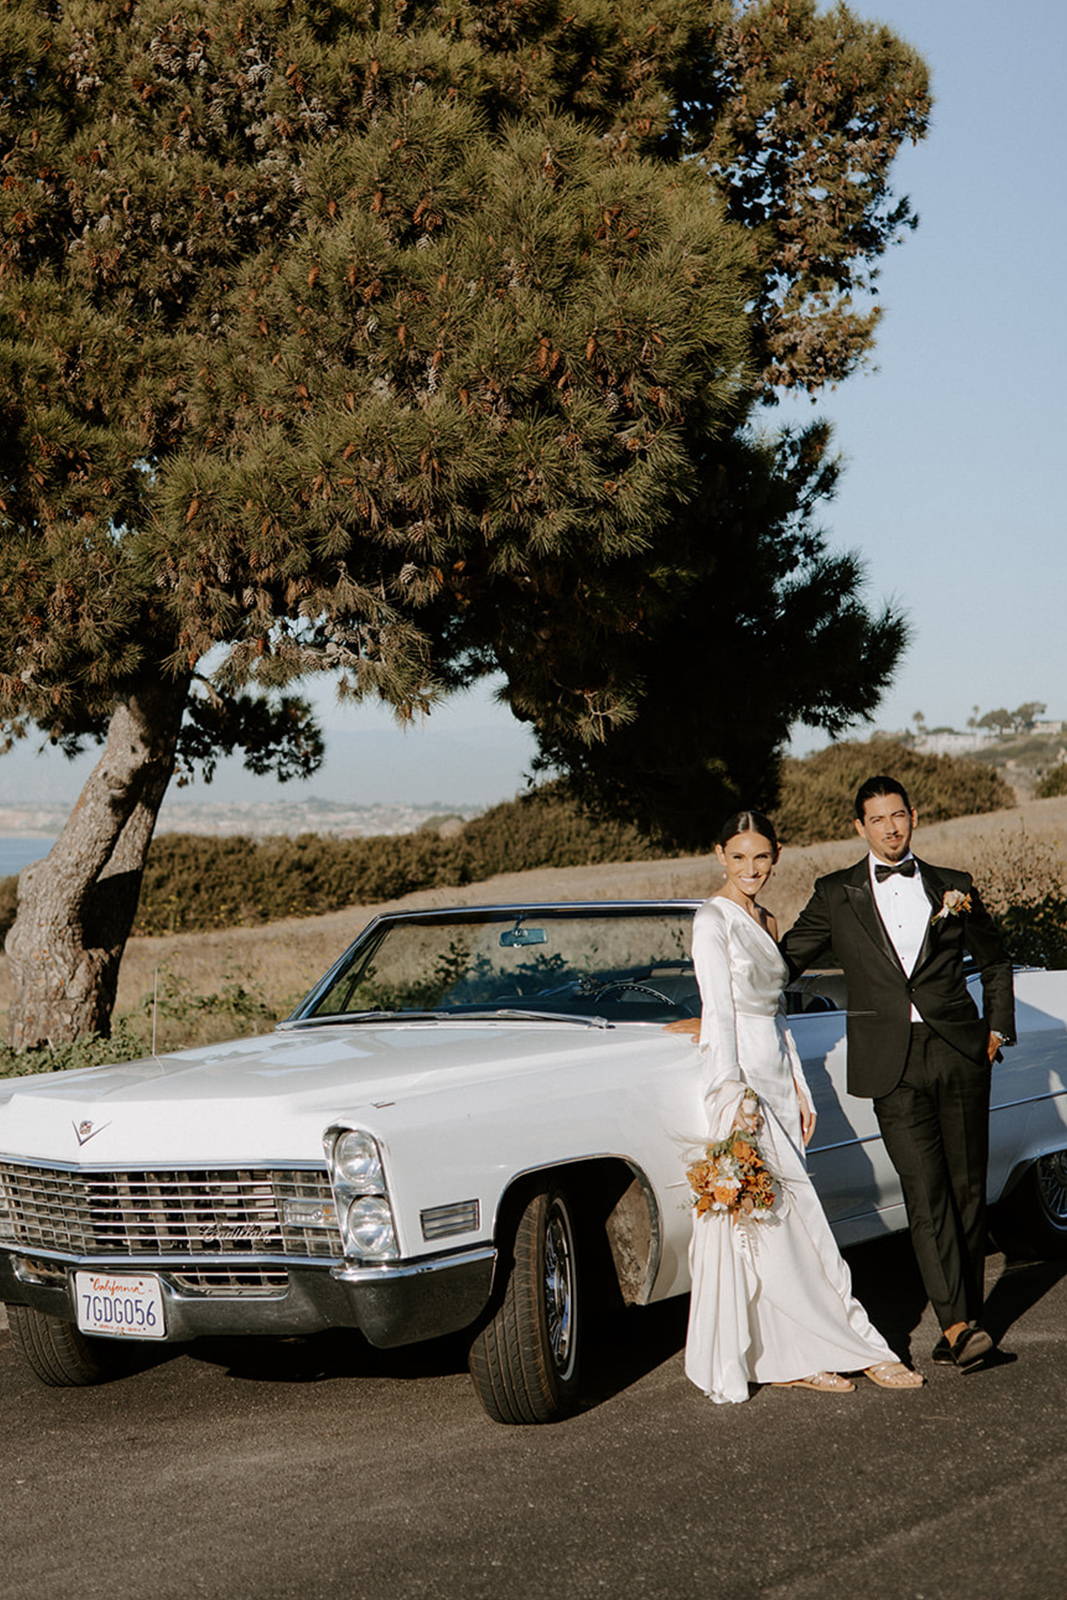 Bride and groom standing next to car